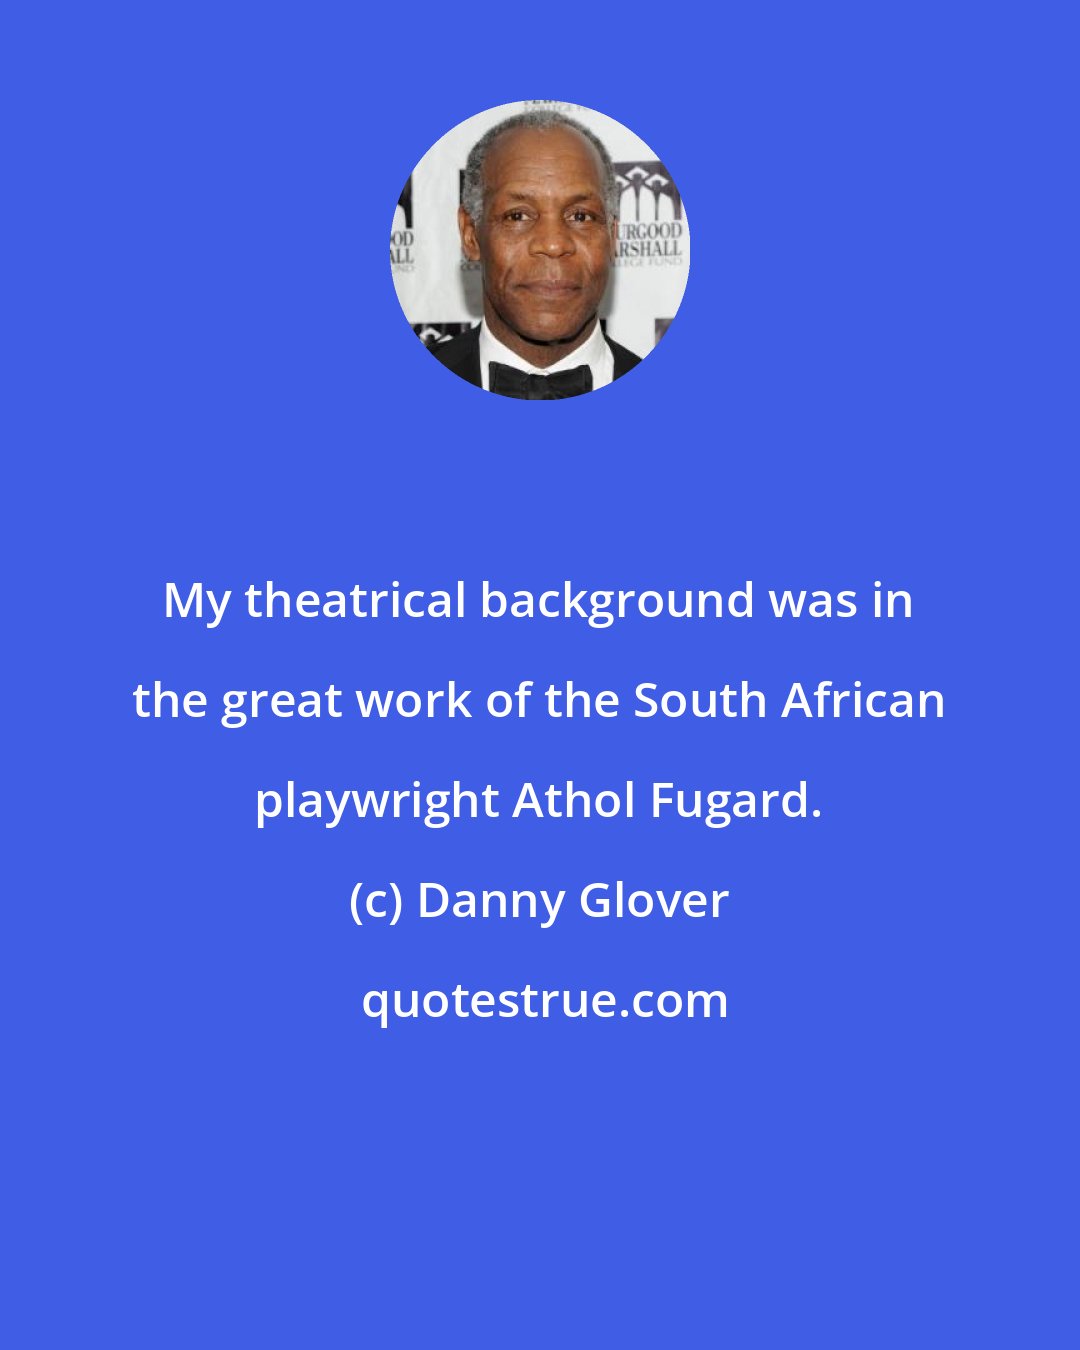 Danny Glover: My theatrical background was in the great work of the South African playwright Athol Fugard.